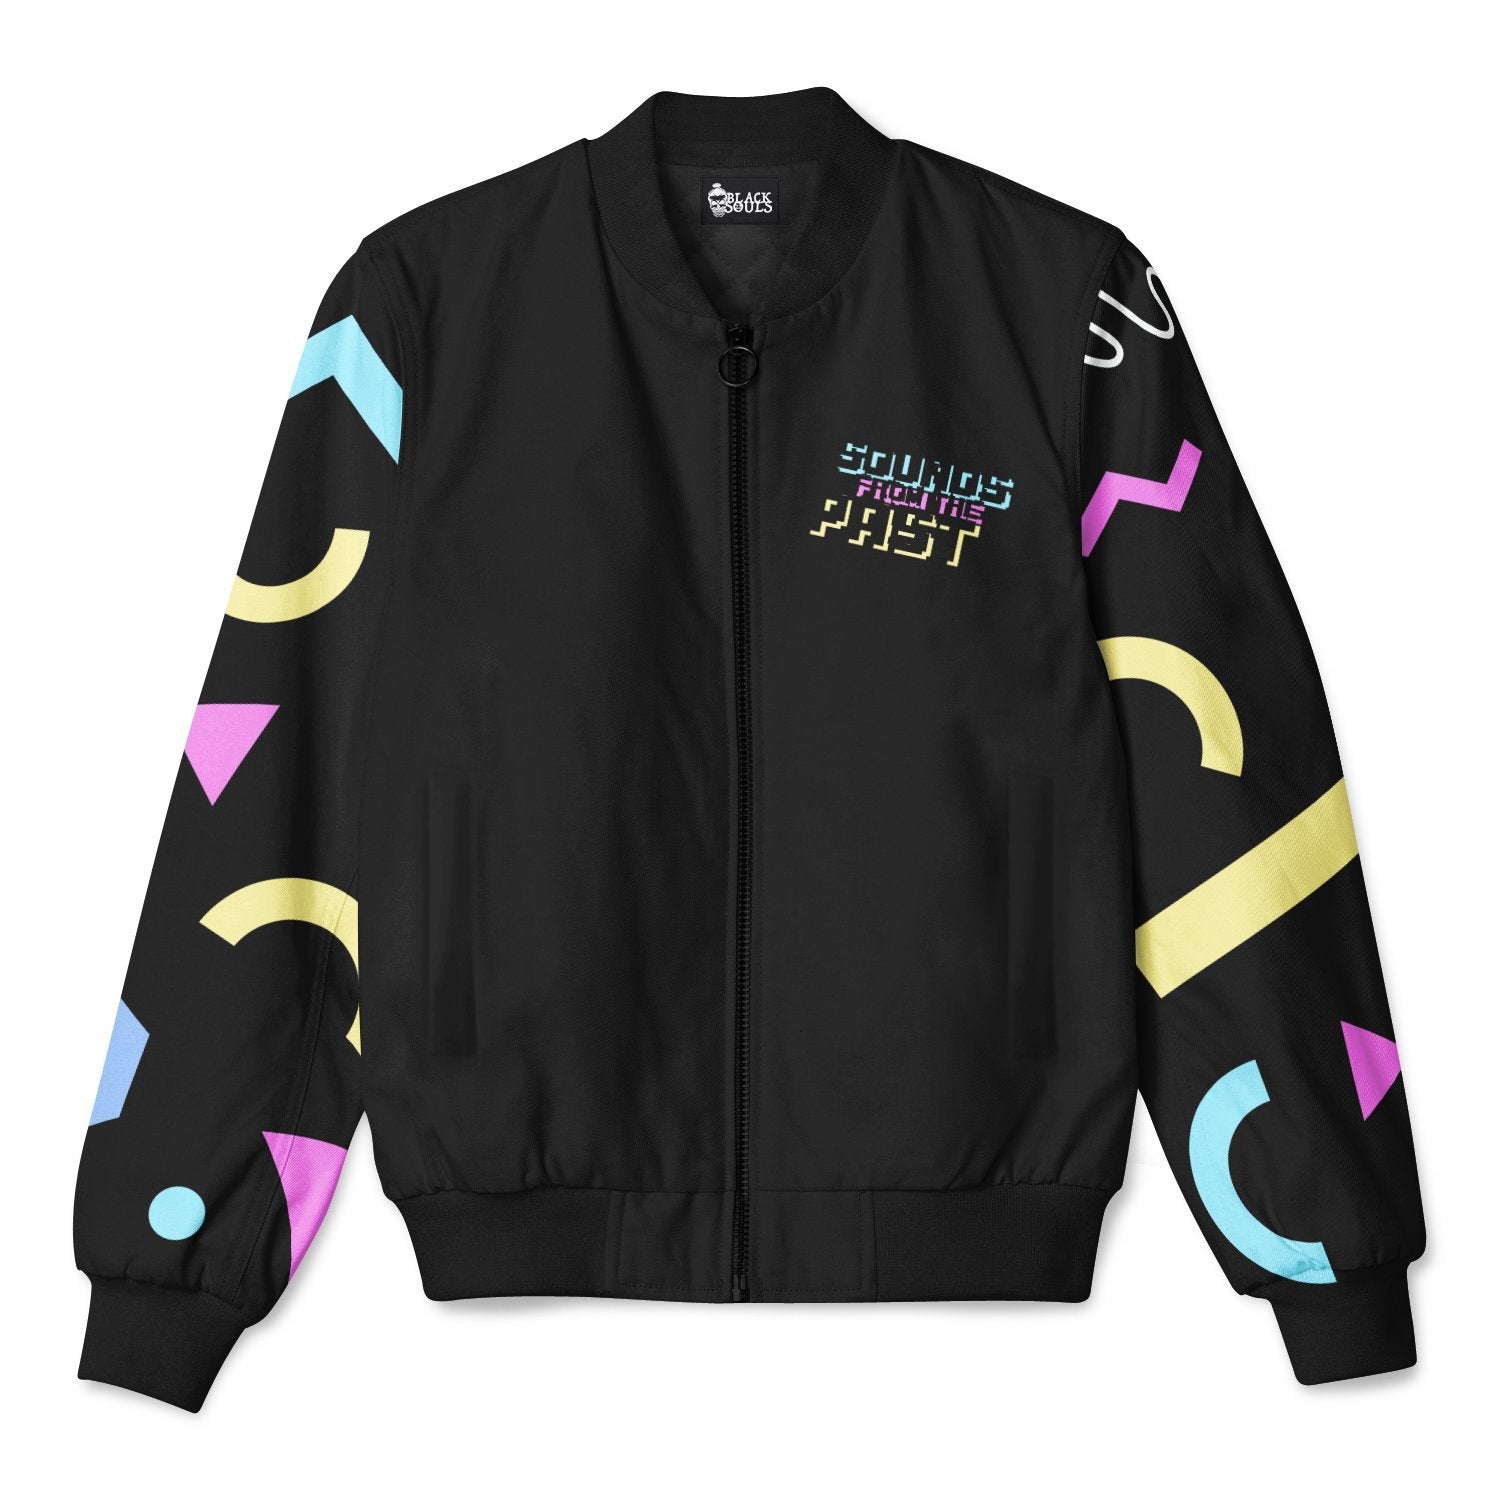 SOUNDS FROM THE PAST BOMBER JACKET - 22BLACKSOULS Clothing